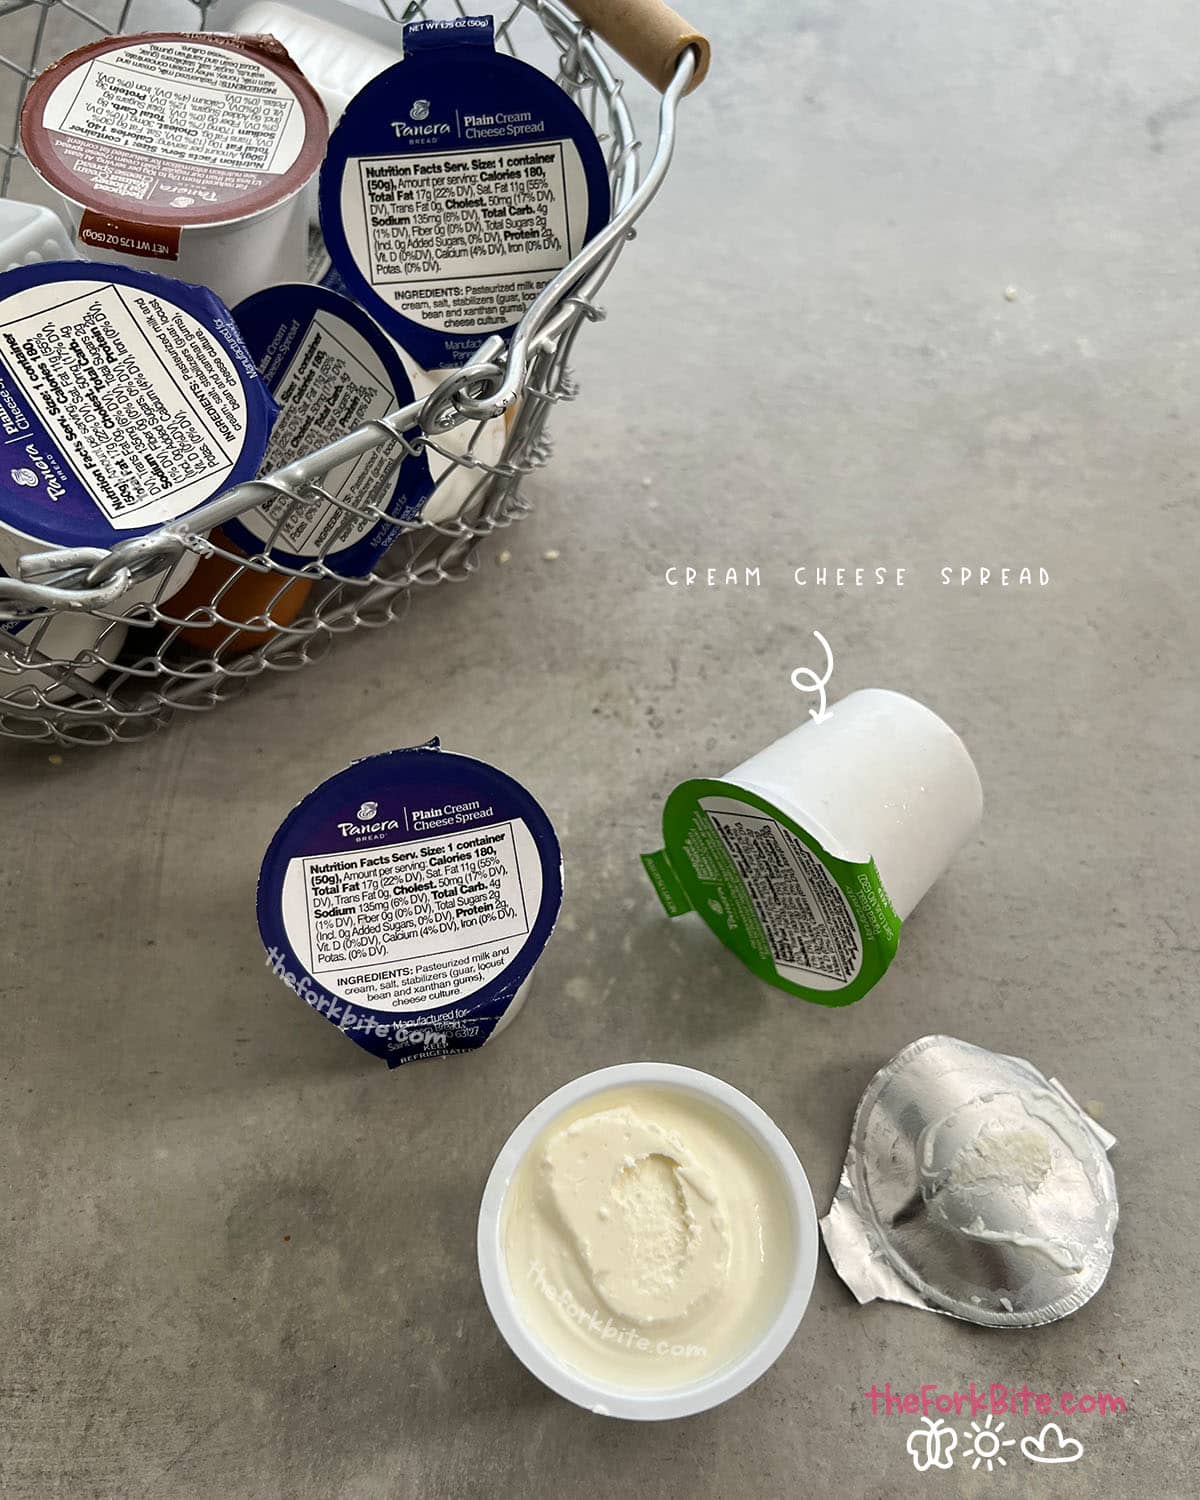 Cream cheese spread is not the same as cream cheese, but it is very similar. The main difference between the two is that cream cheese spread is made with less milk and has a smoother, more spreadable consistency.